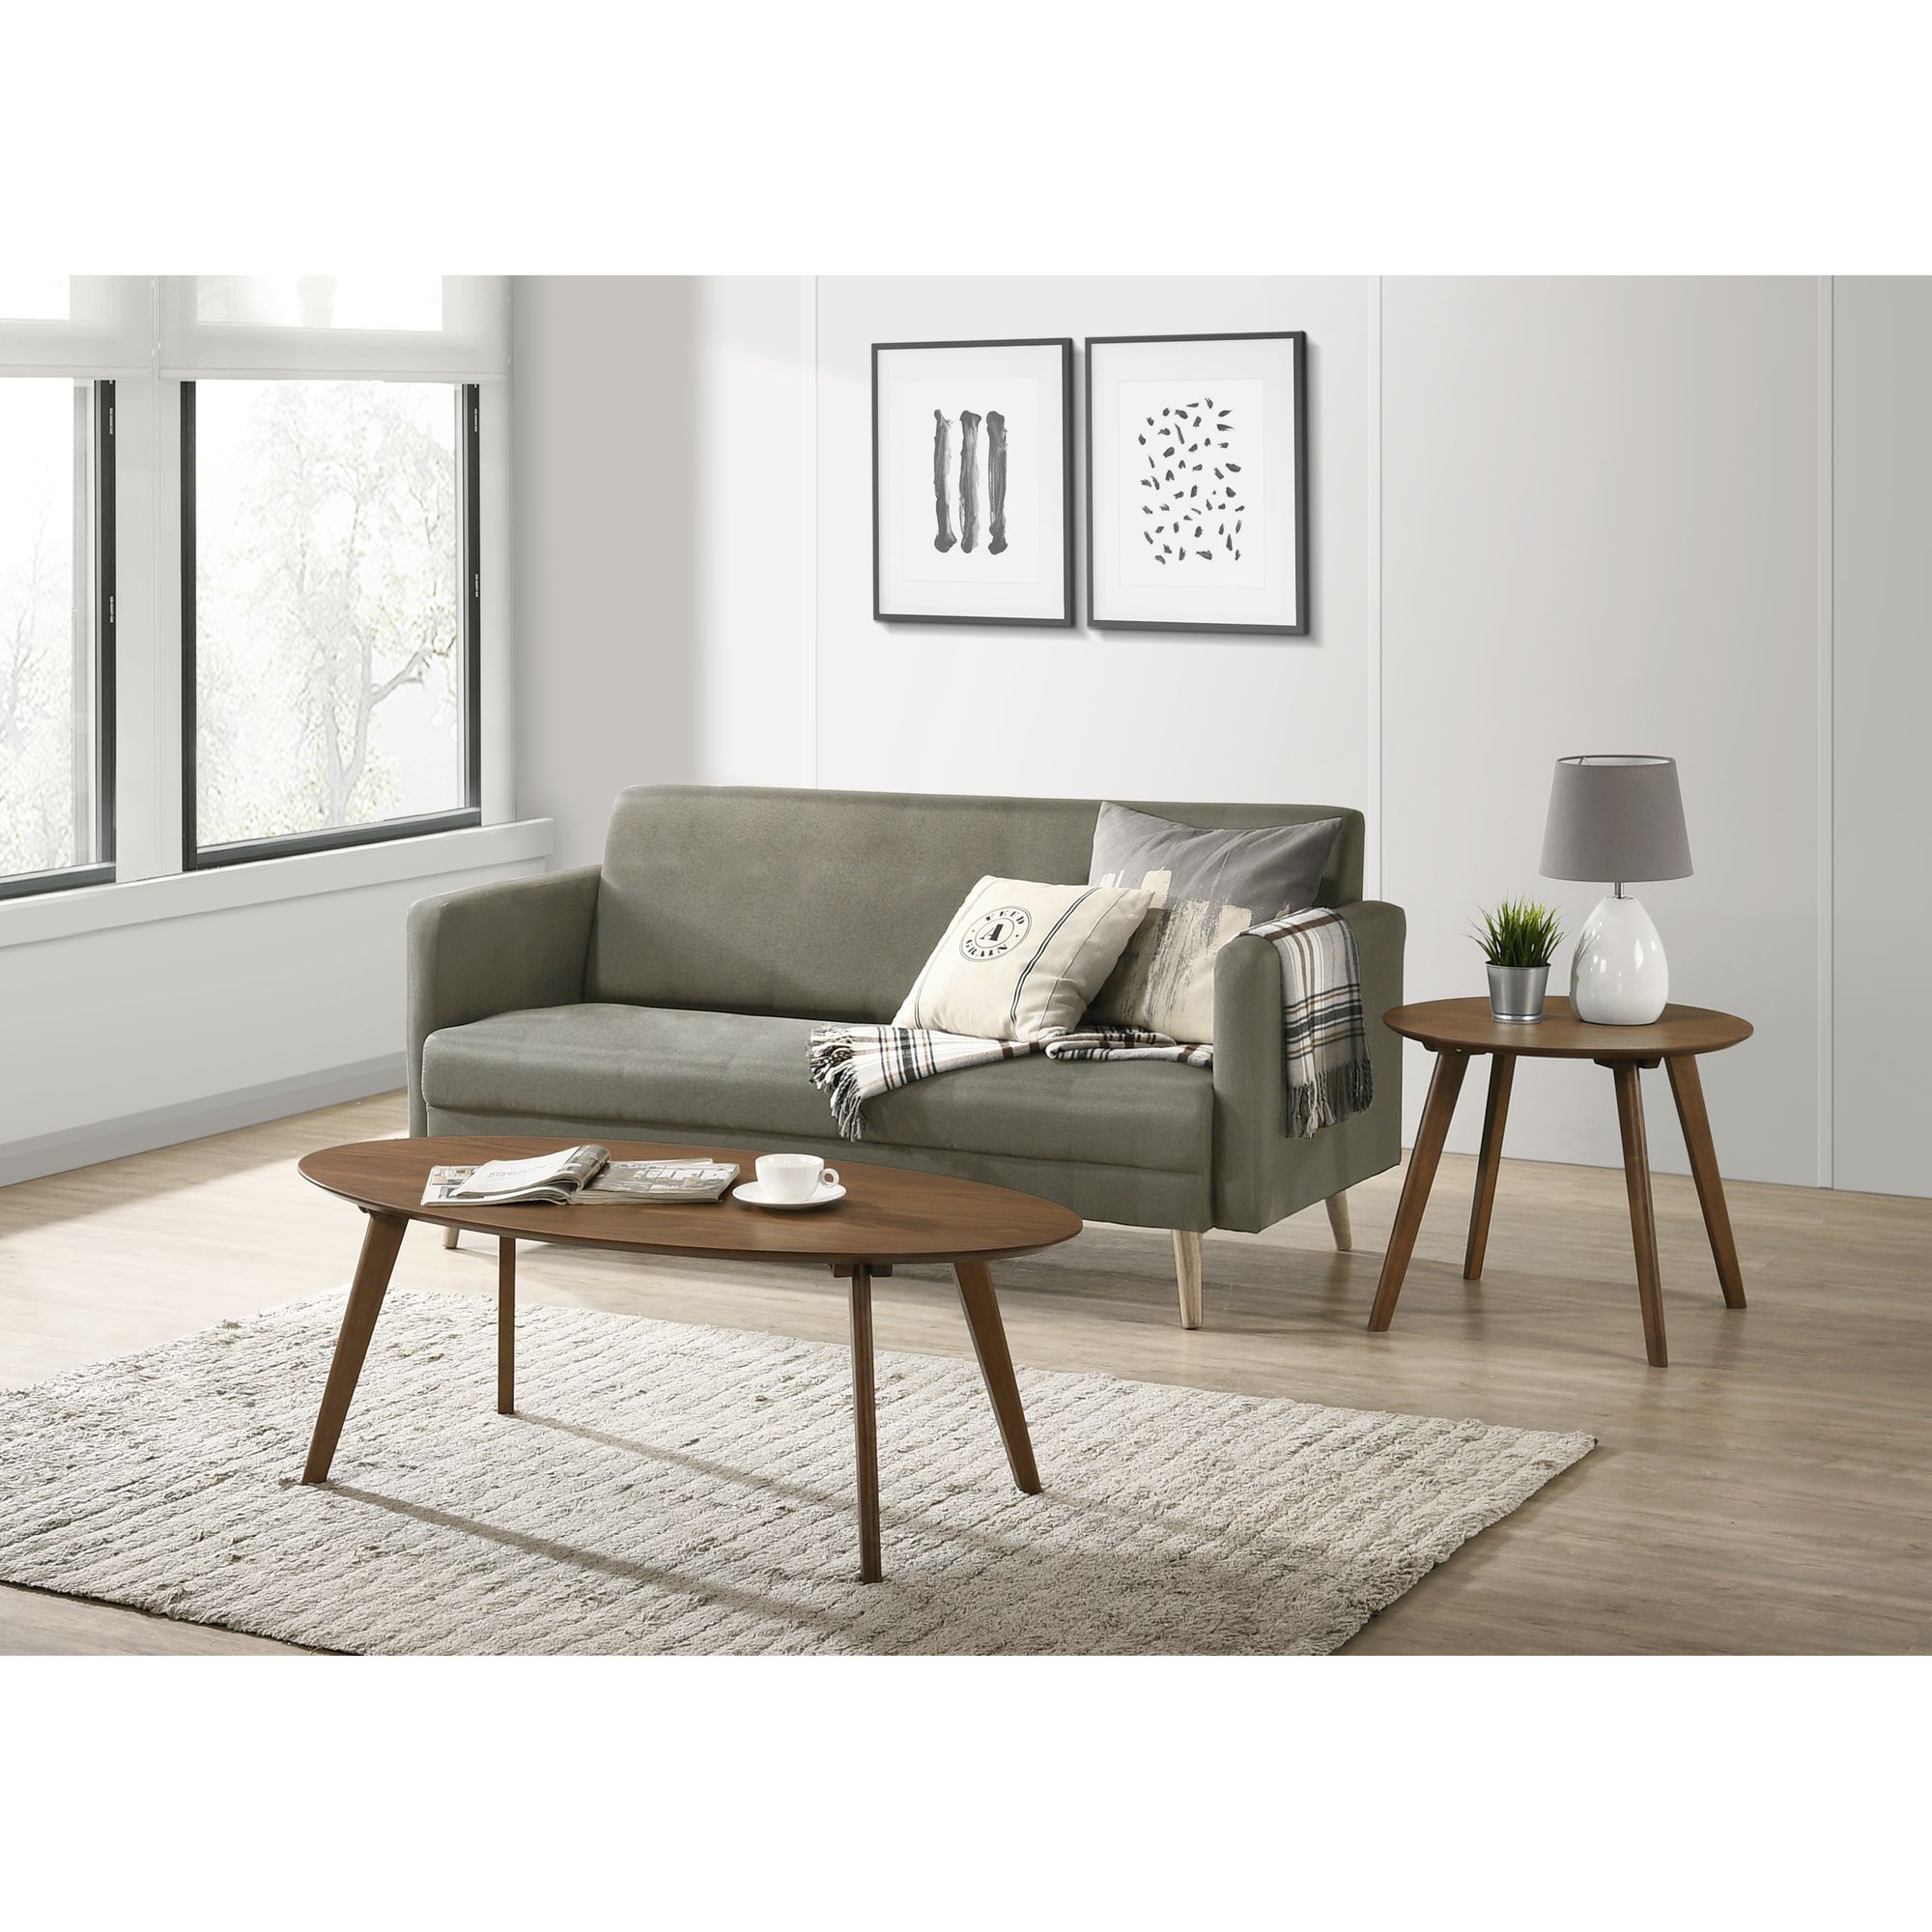 Rocco Accent & Coffee Tables at Lowes.com